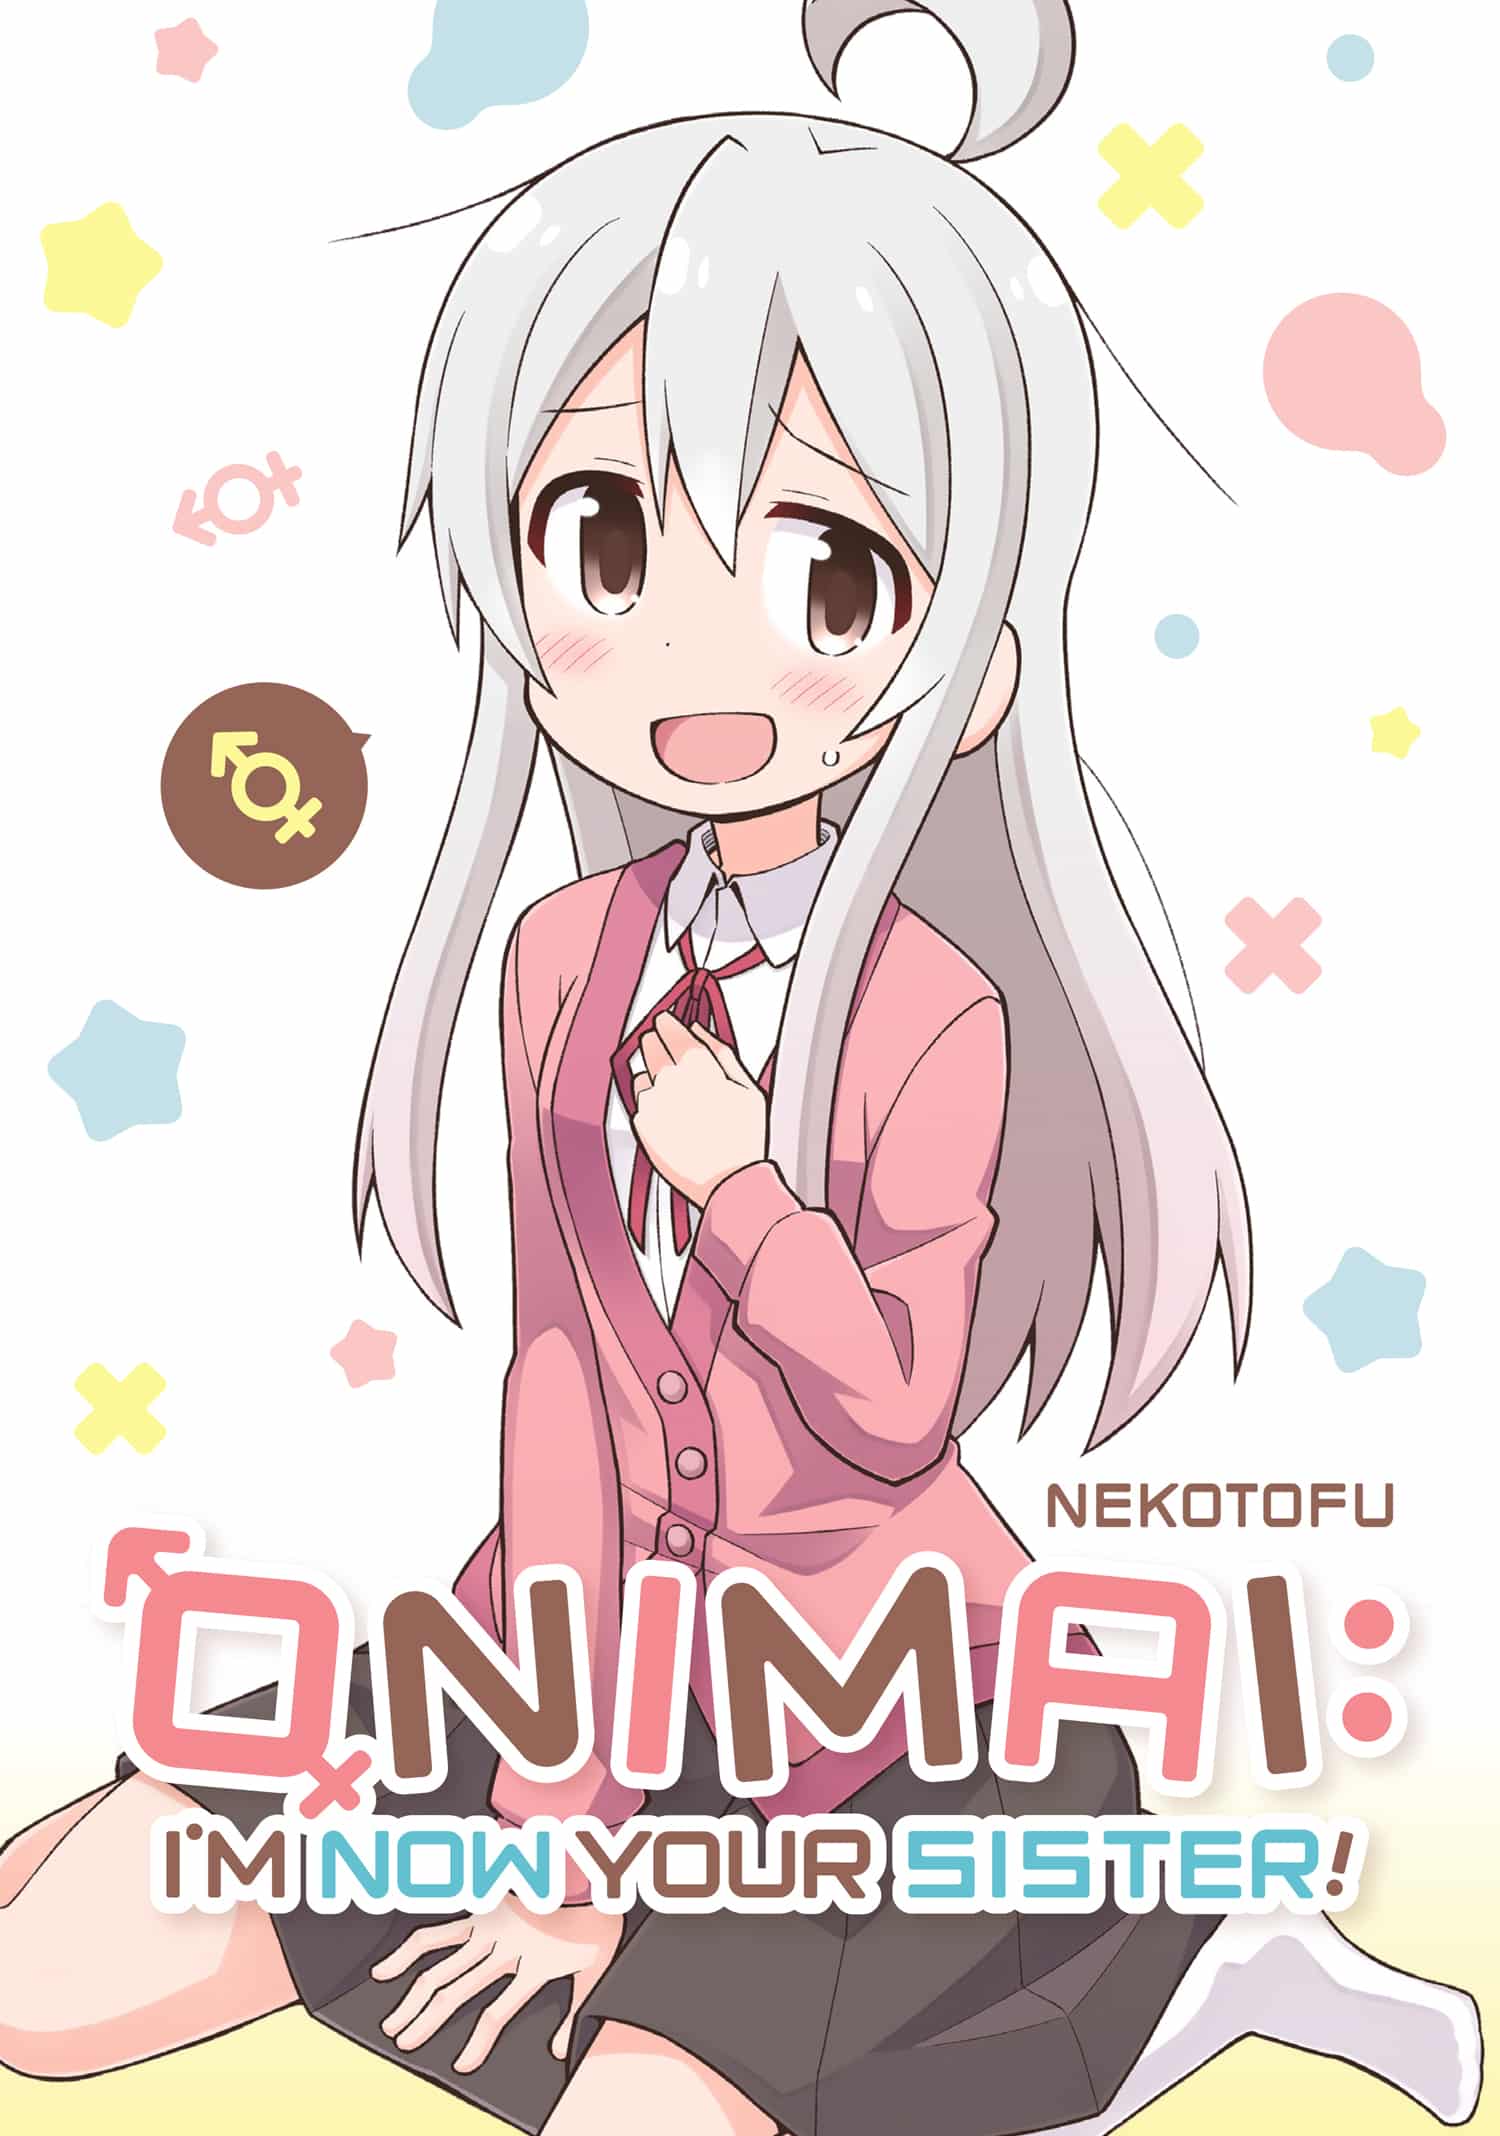 Onimai: I'm Now Your Sister! Volume 1